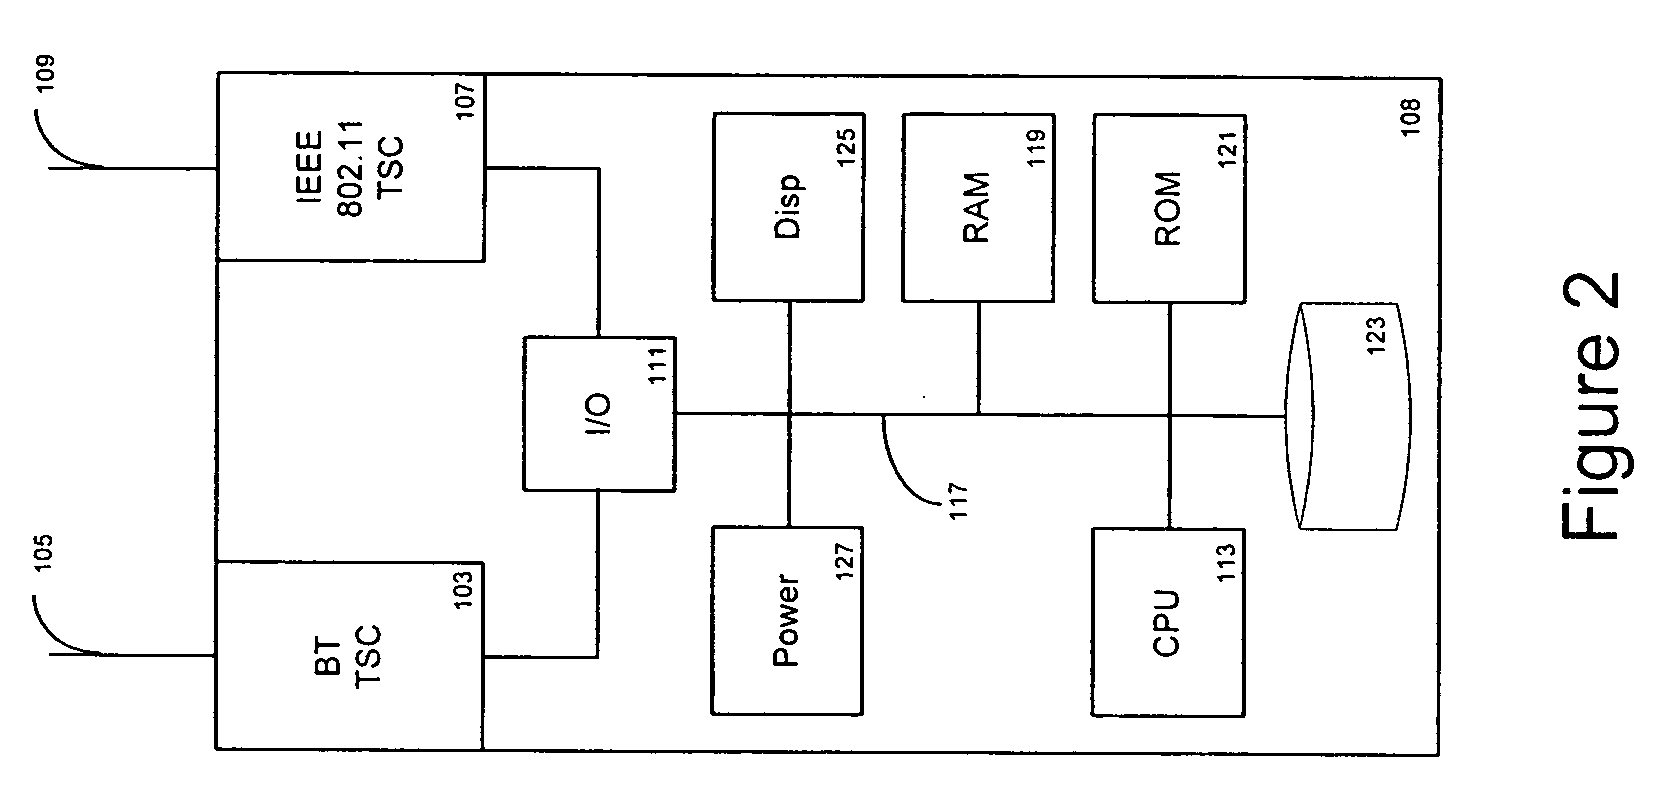 Wireless gateway for enabling wireless devices to discover and interact with various short-range services/devices